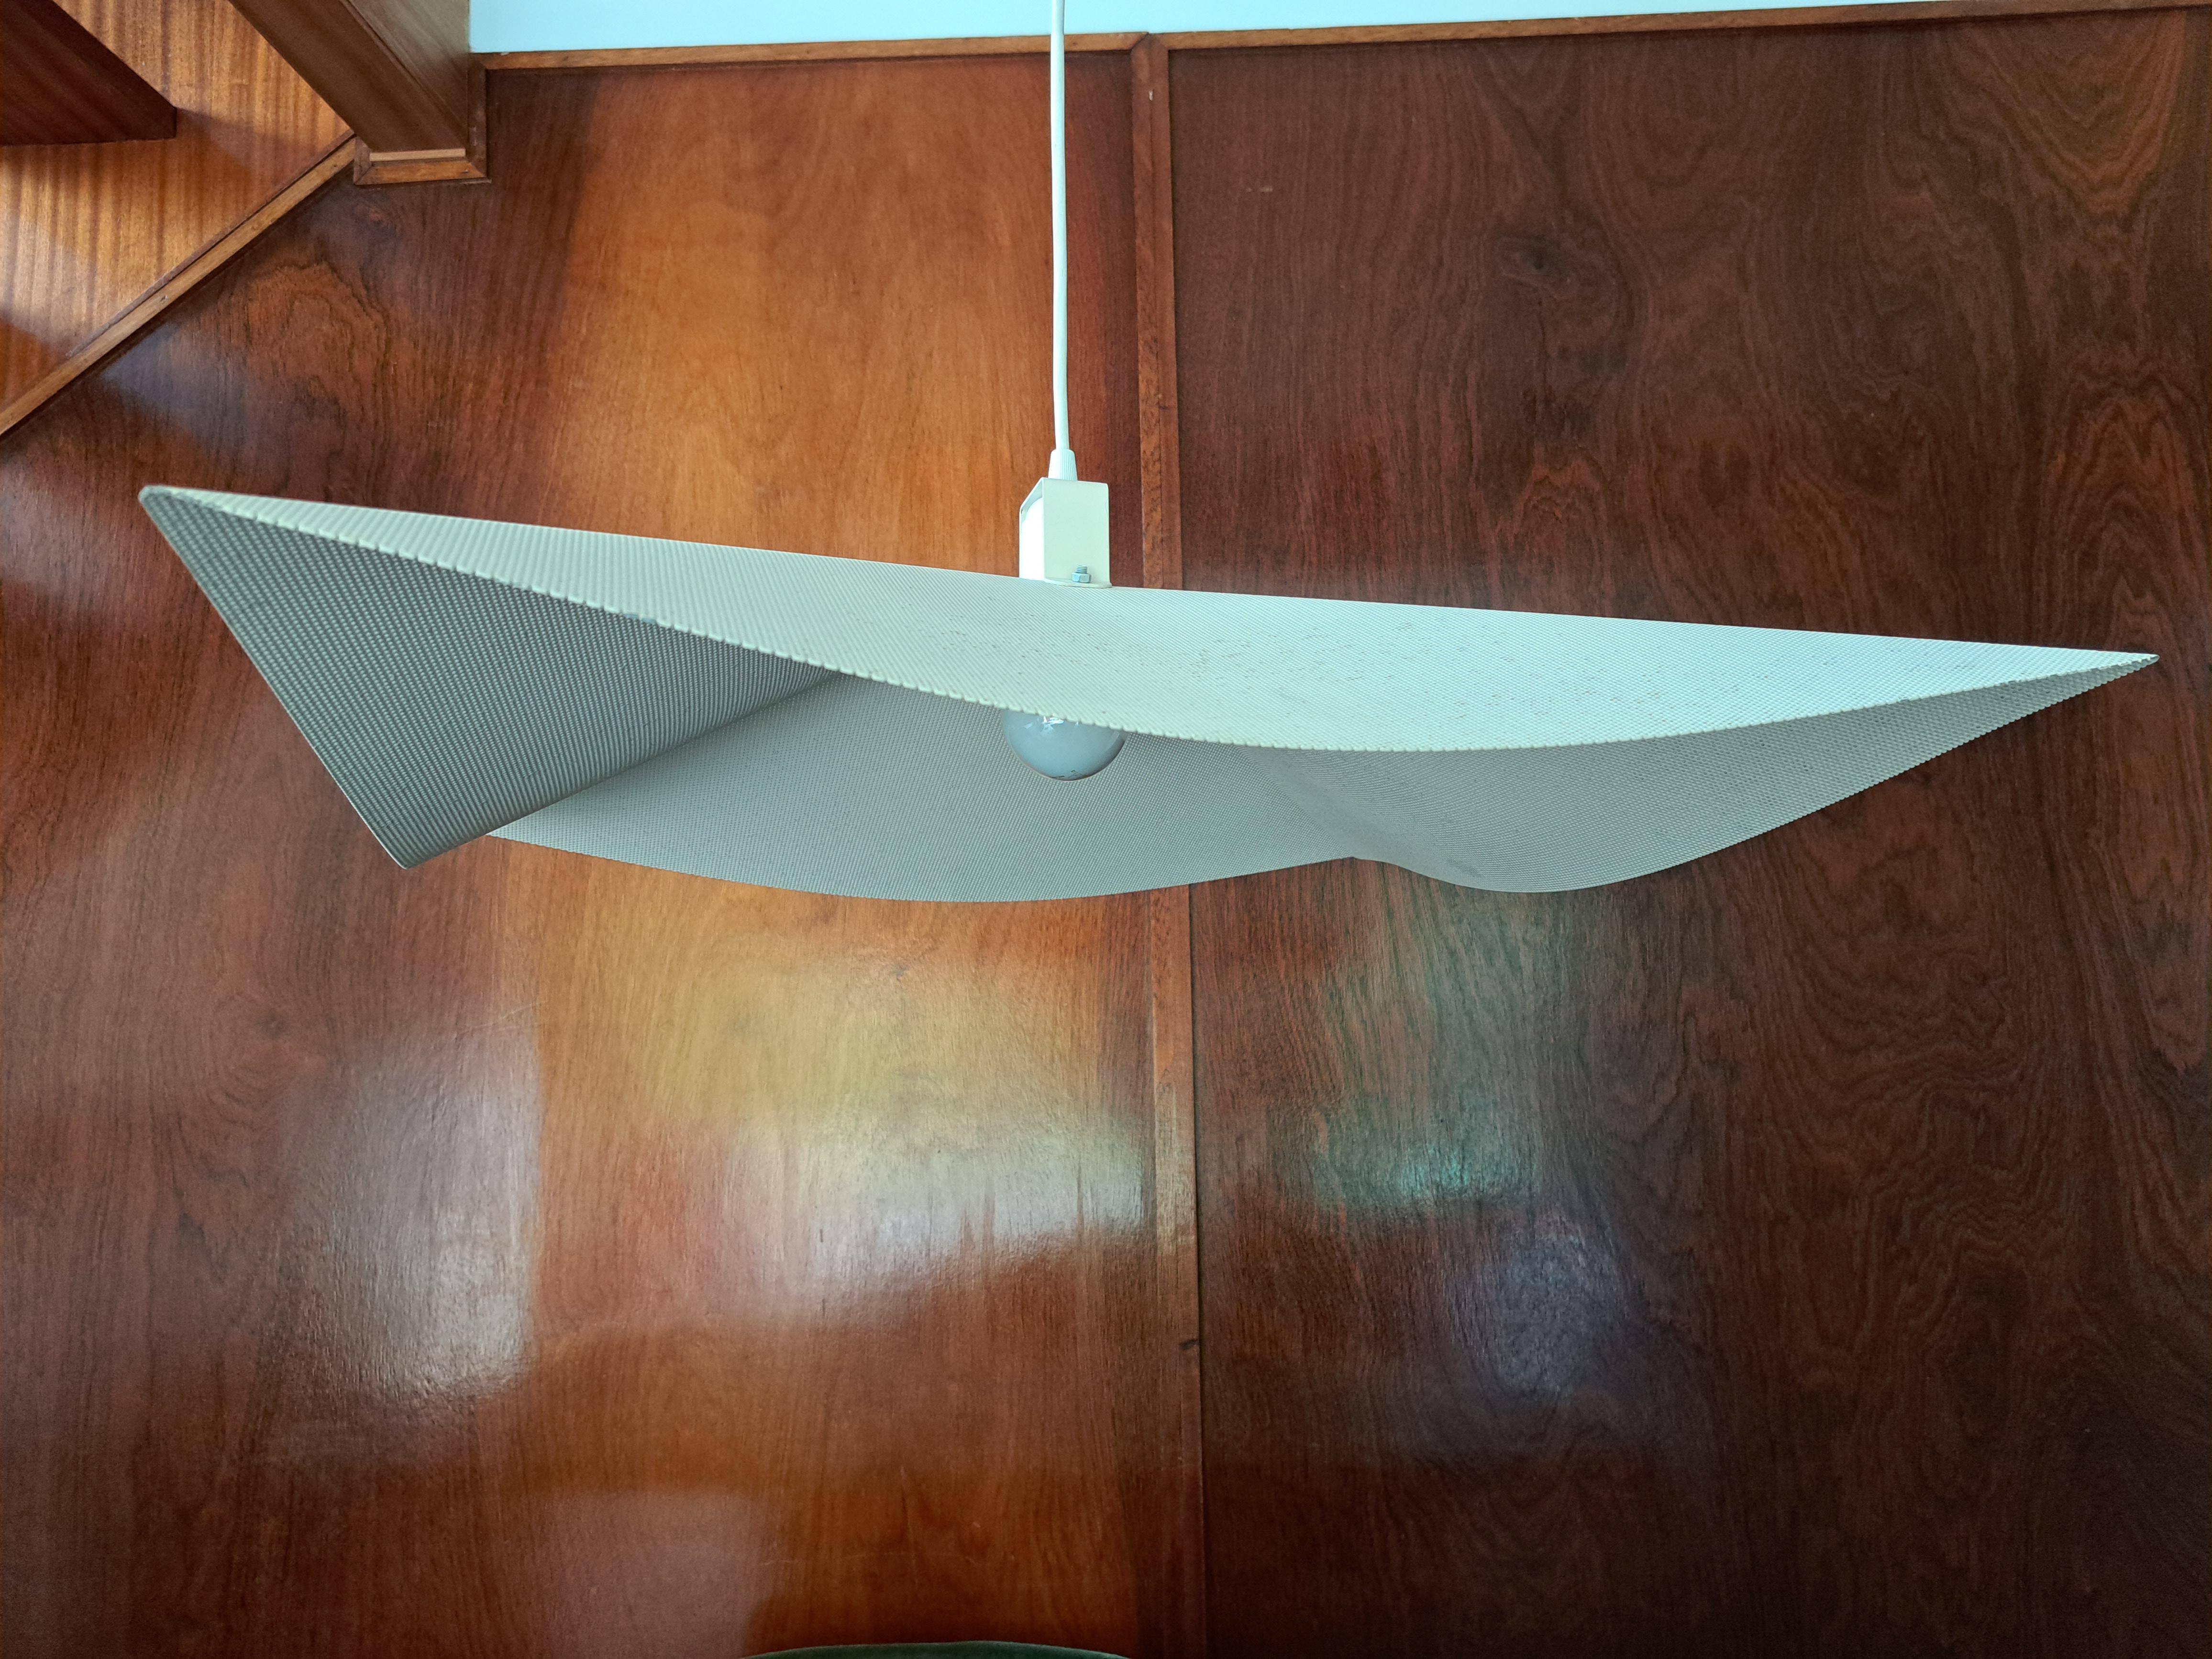 Postmodernism late 20th-century, elegant ceiling light made out of a continuous perforated metal. Creating a rather light floating shape. Original Cream colour, the colour looks like it might have been recoated at a later date. Overall condition,